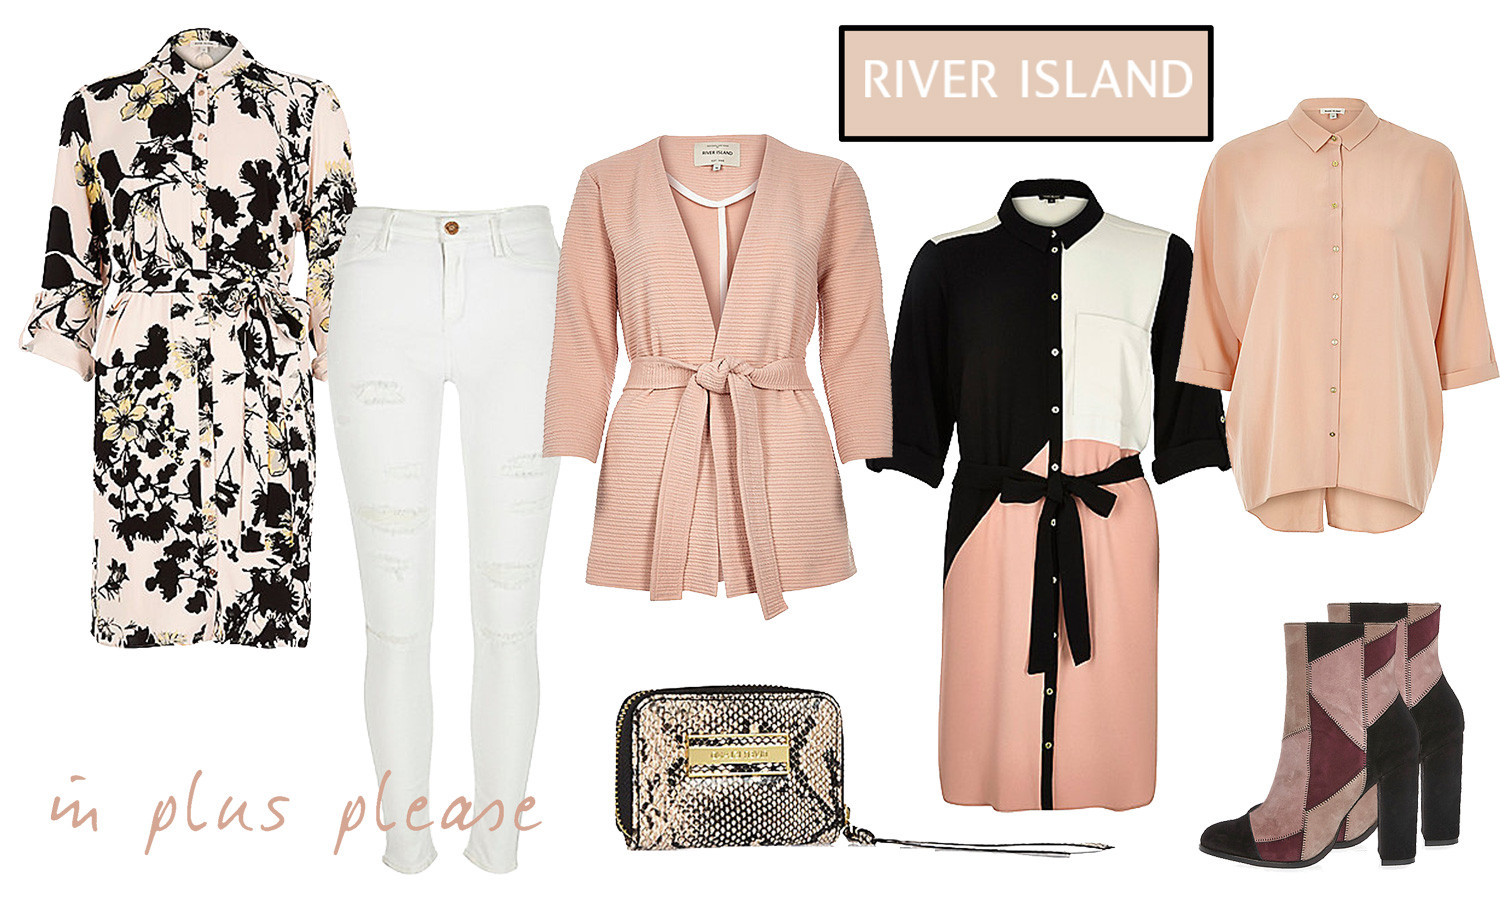 River Island is going Plus